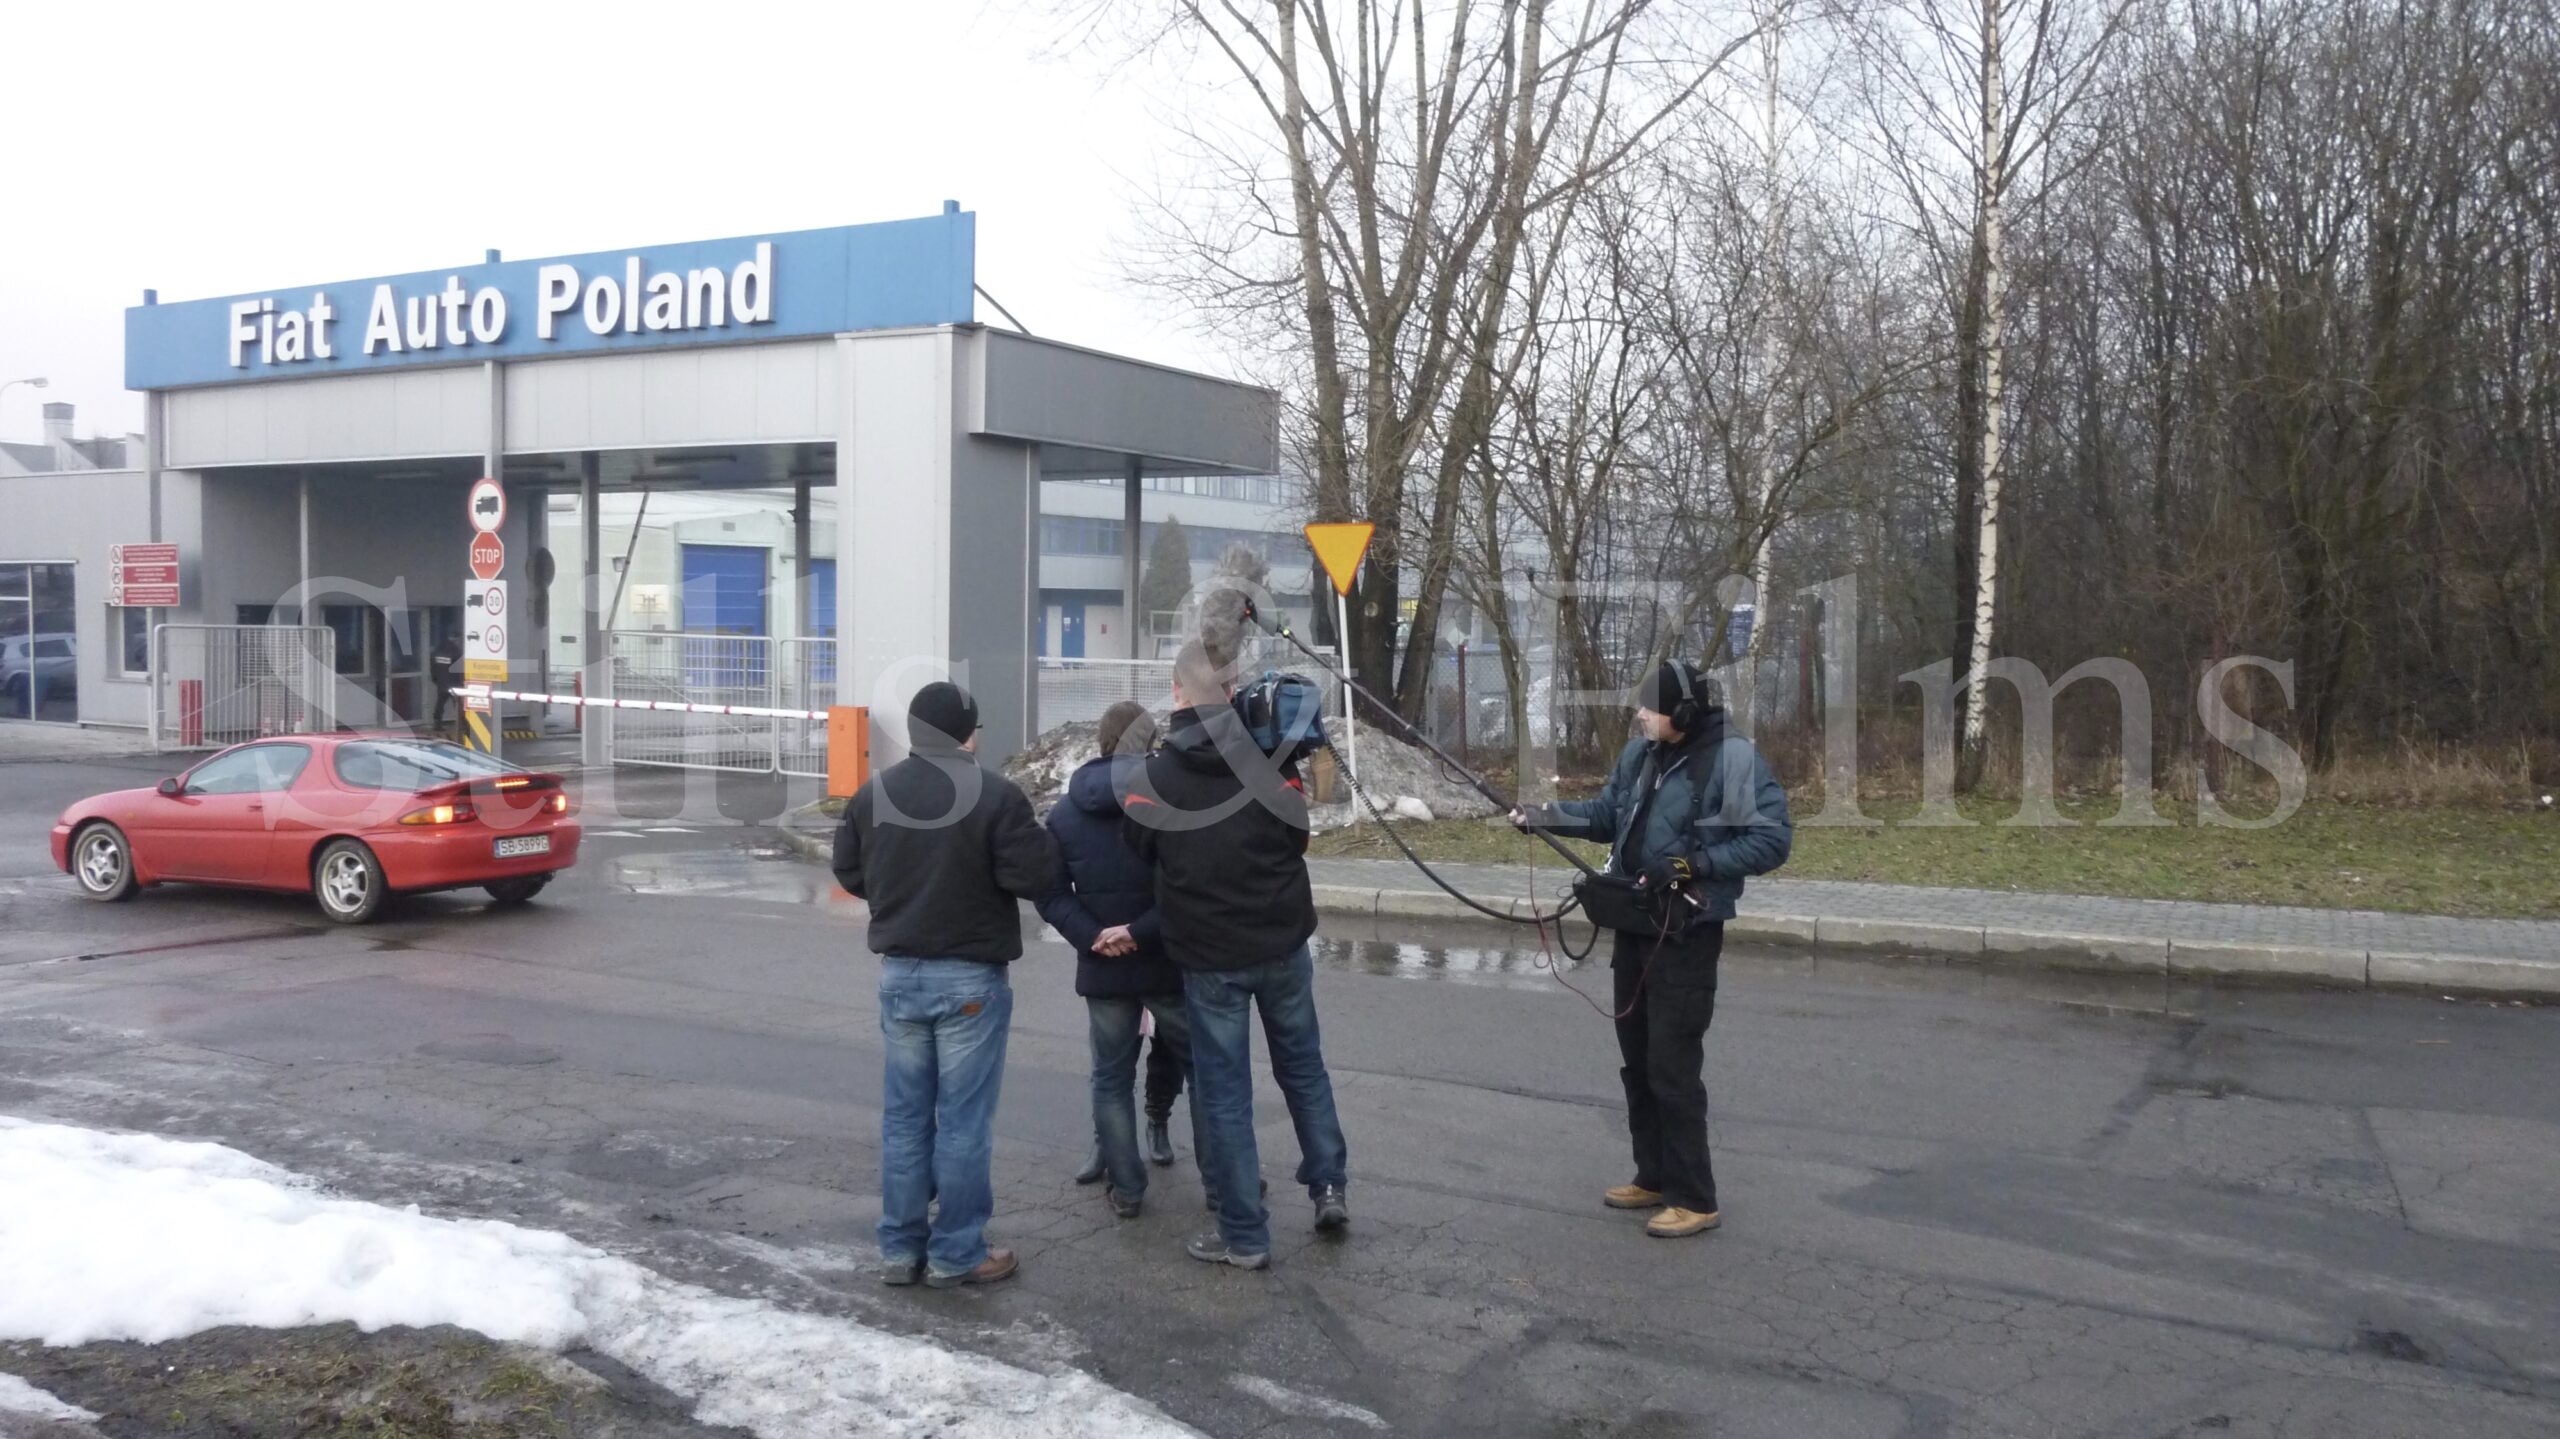 Video Crew Warsaw films at FIAT for an Italian broadcaster